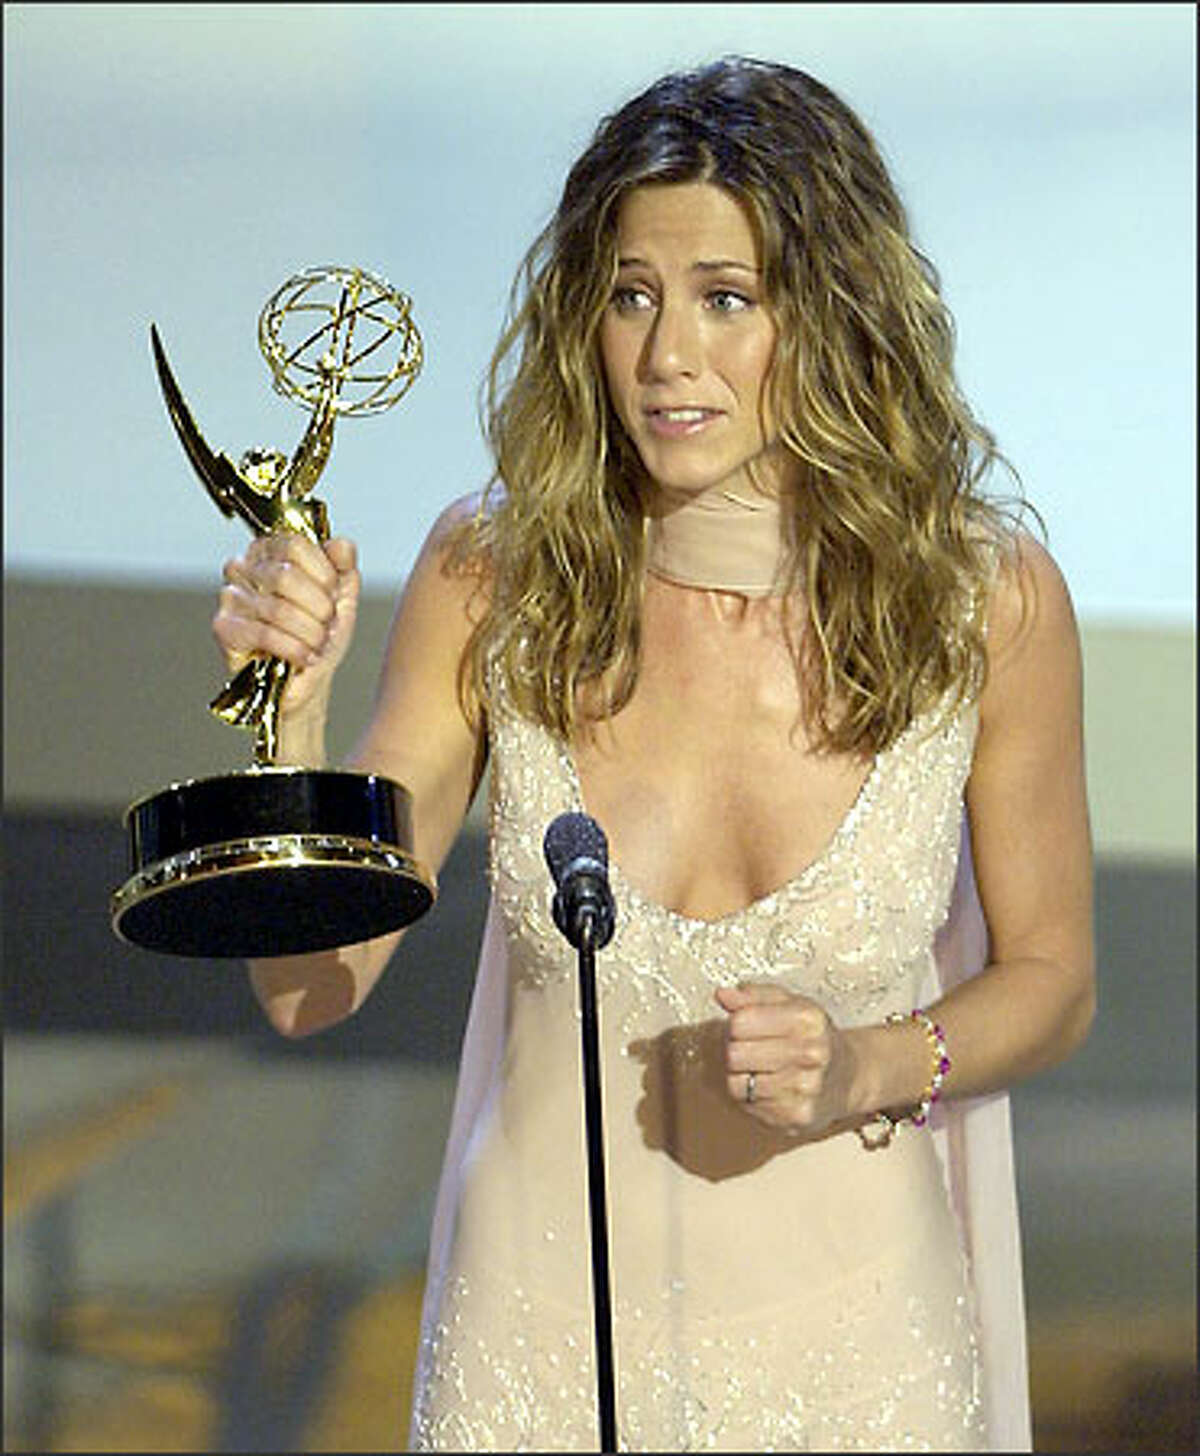 Jennifer Aniston accepts her Emmy for outstanding lead actress in a comedy series for her work in "Friends." The show also won for comedy series.